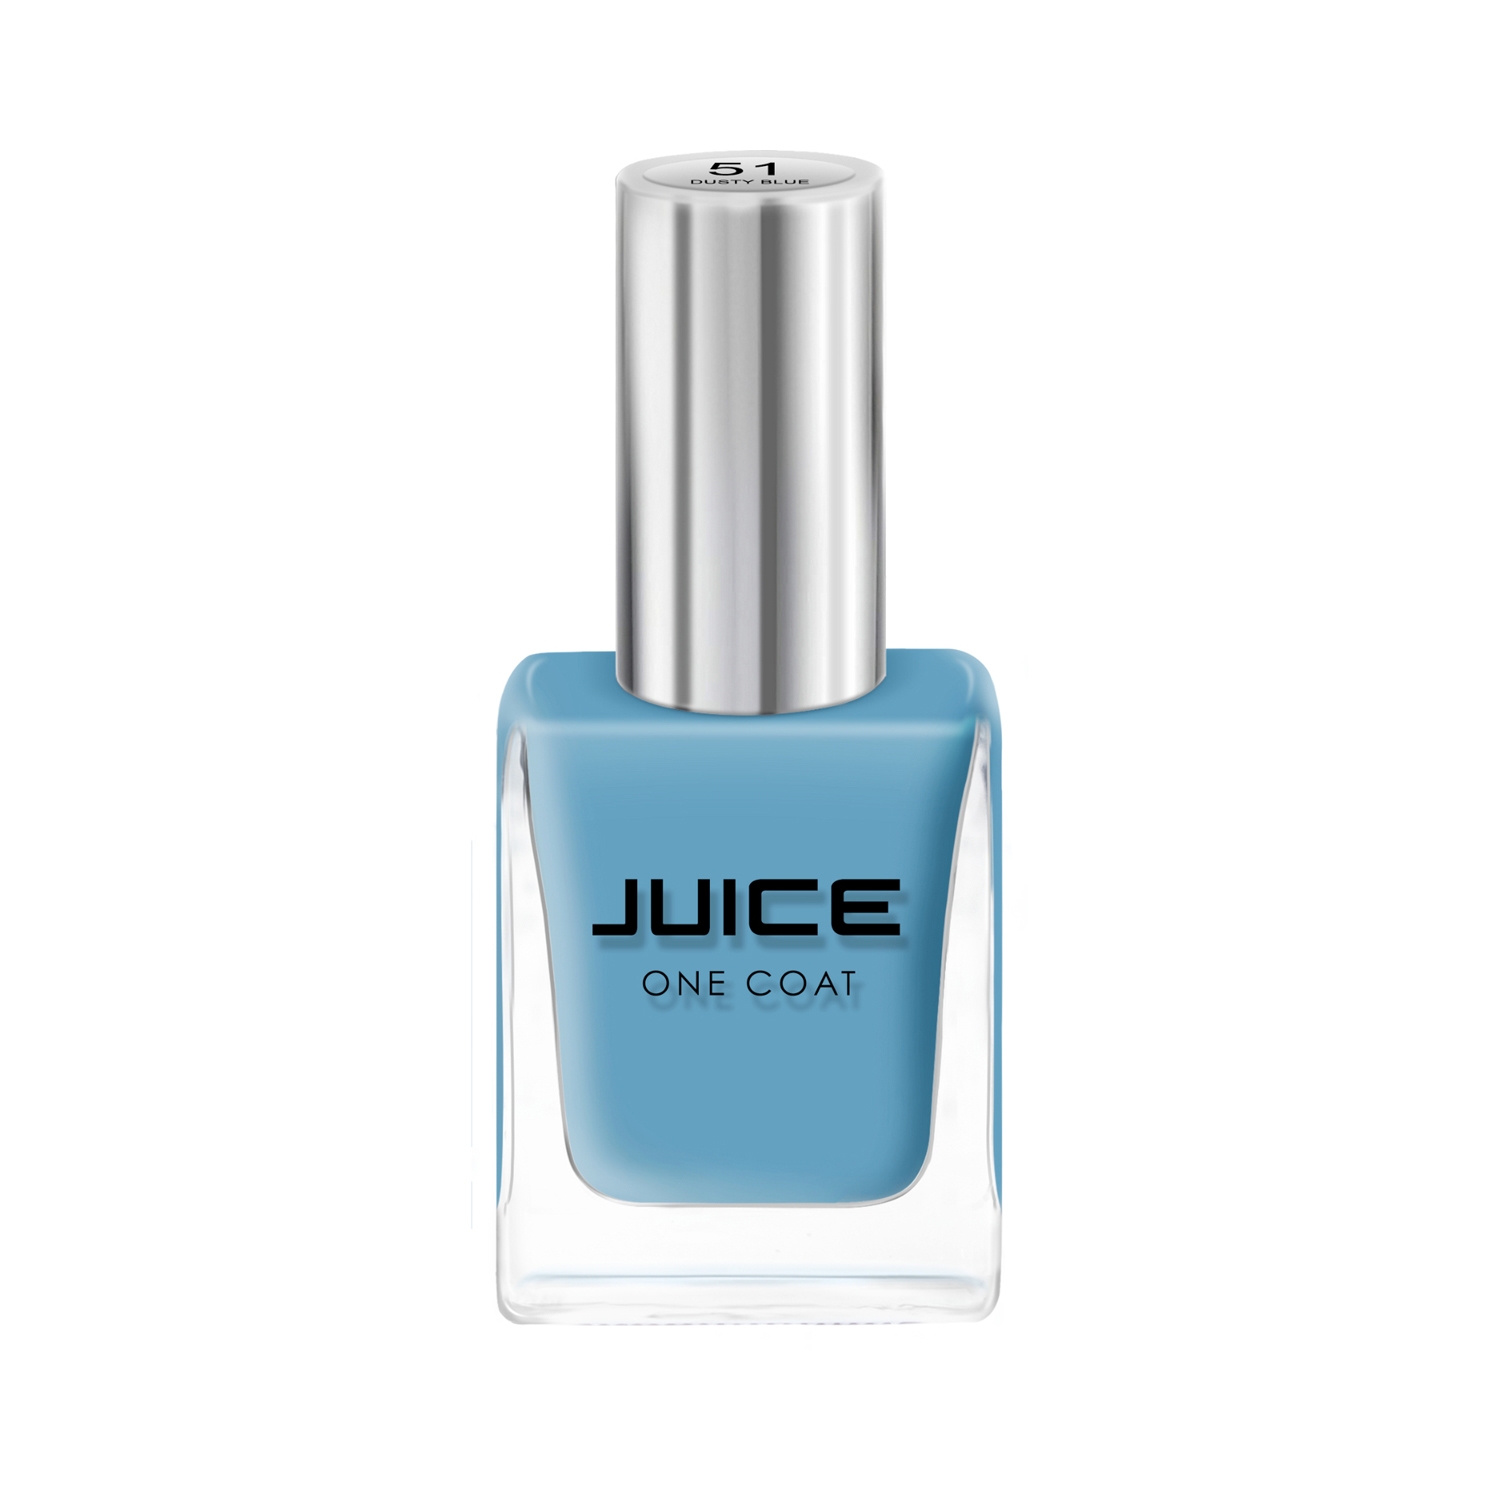 JUICE | Juice One Coat Quick Dry Chip Resistant Nail Polish - 51 Dusty Blue (11ml)